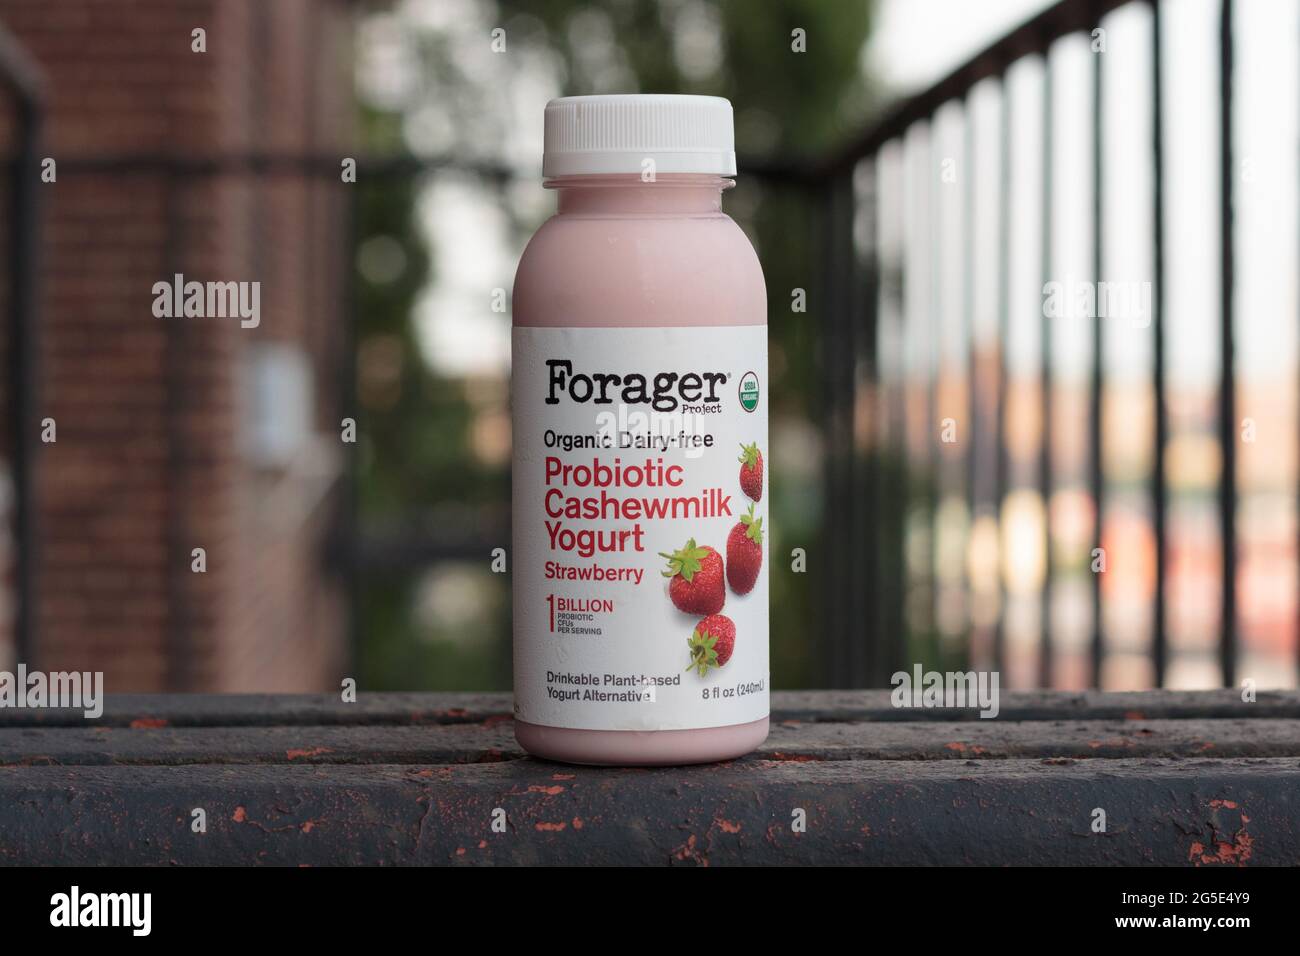 bottle of strawberry flavored organic dairy-free probiotic cashewmilk drinkable yogurt by the Forager Project brand, on a fire escape Stock Photo